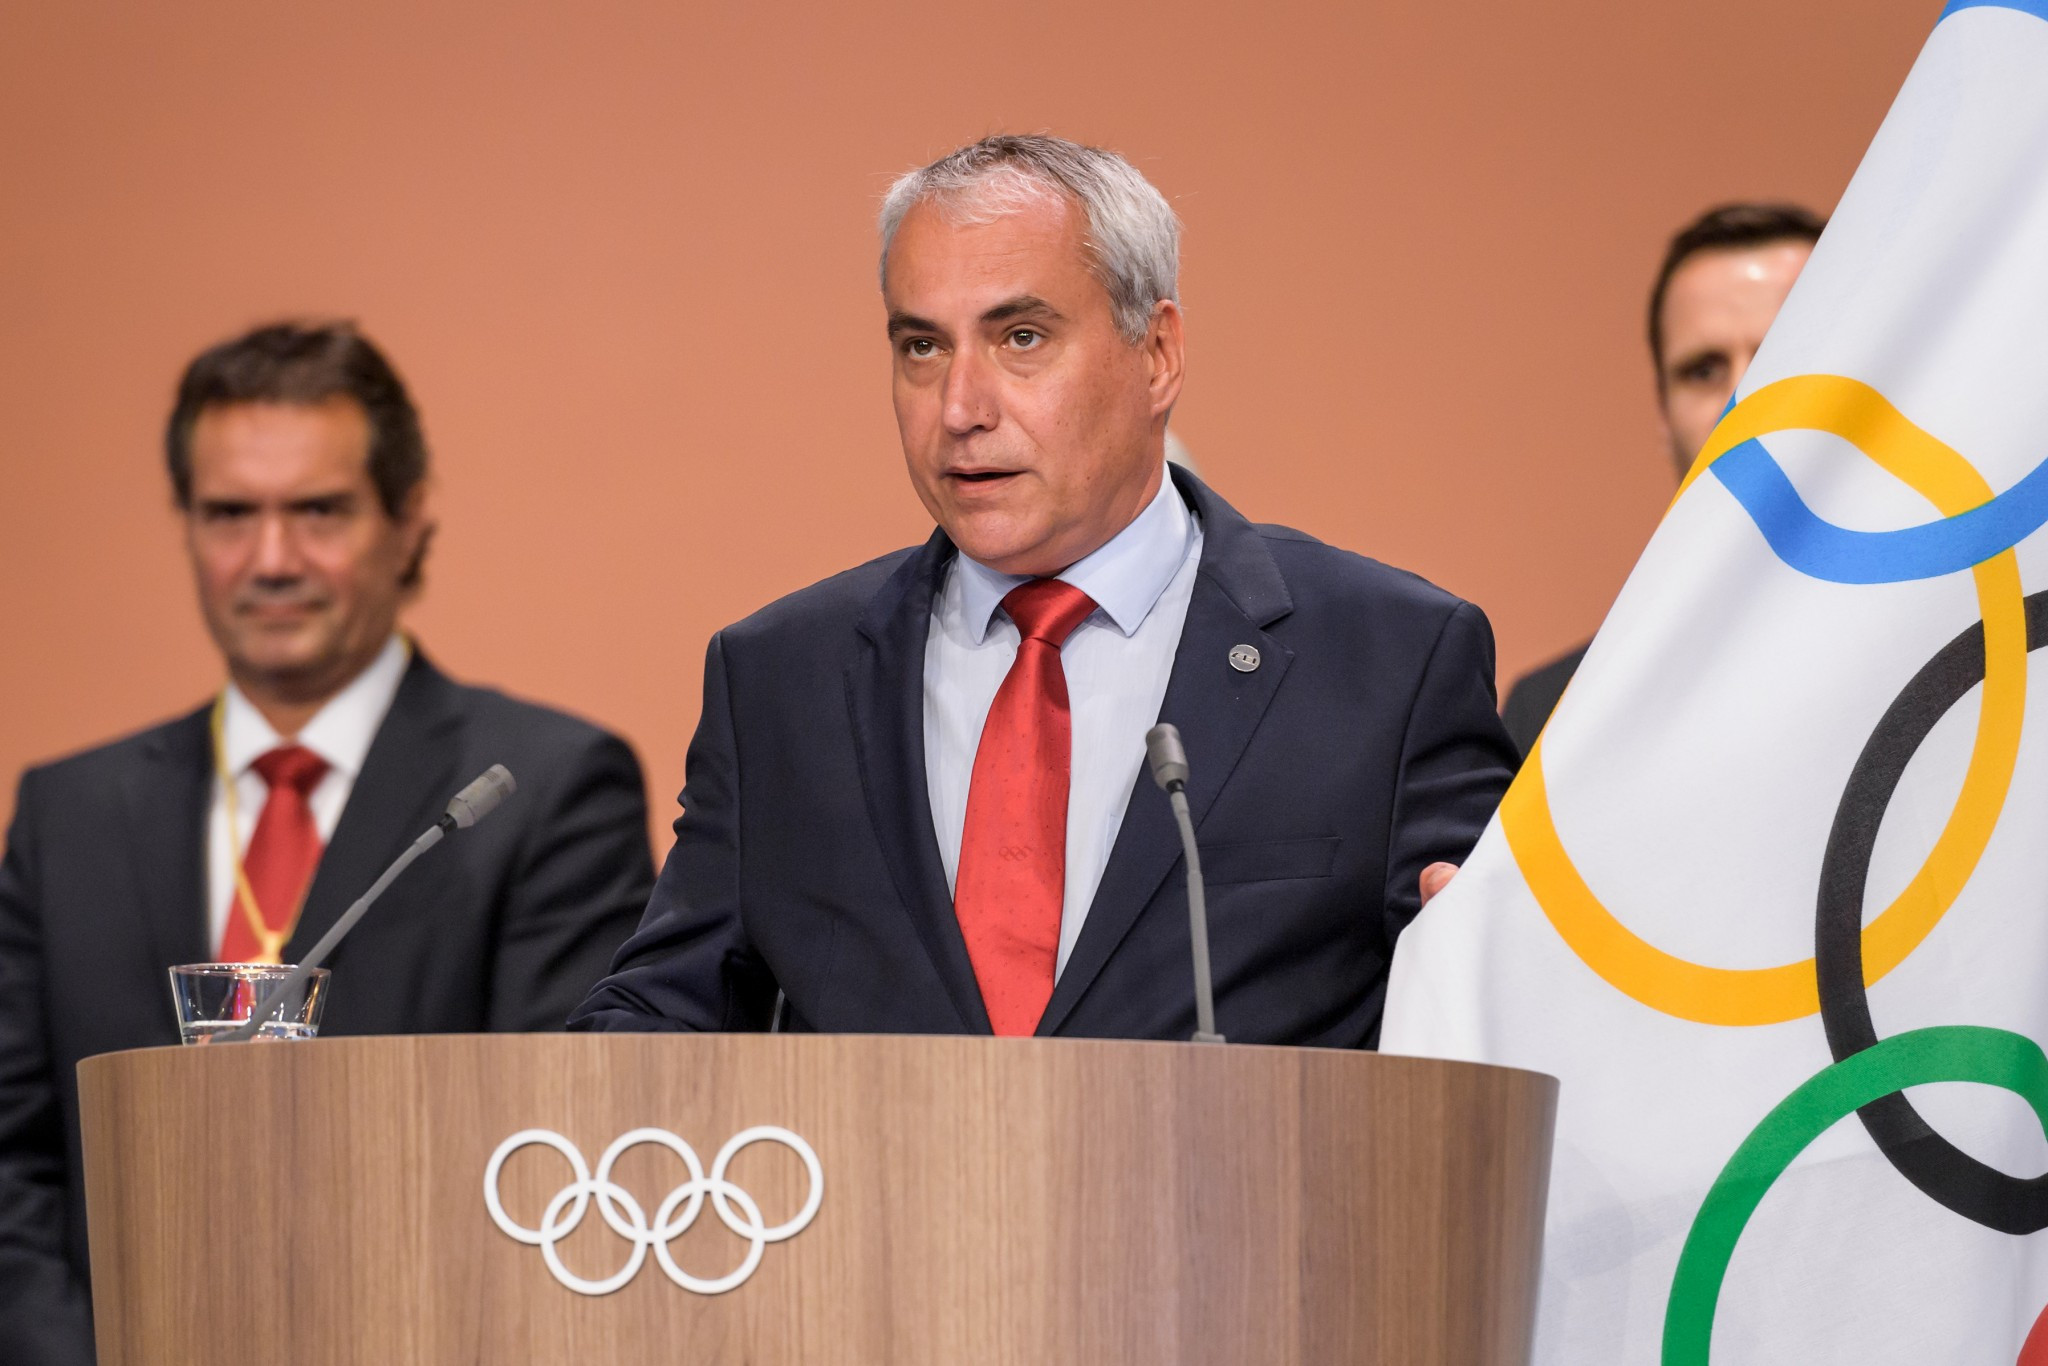 FEI President aims to boost role of federations in delivering Olympics after election as IOC member